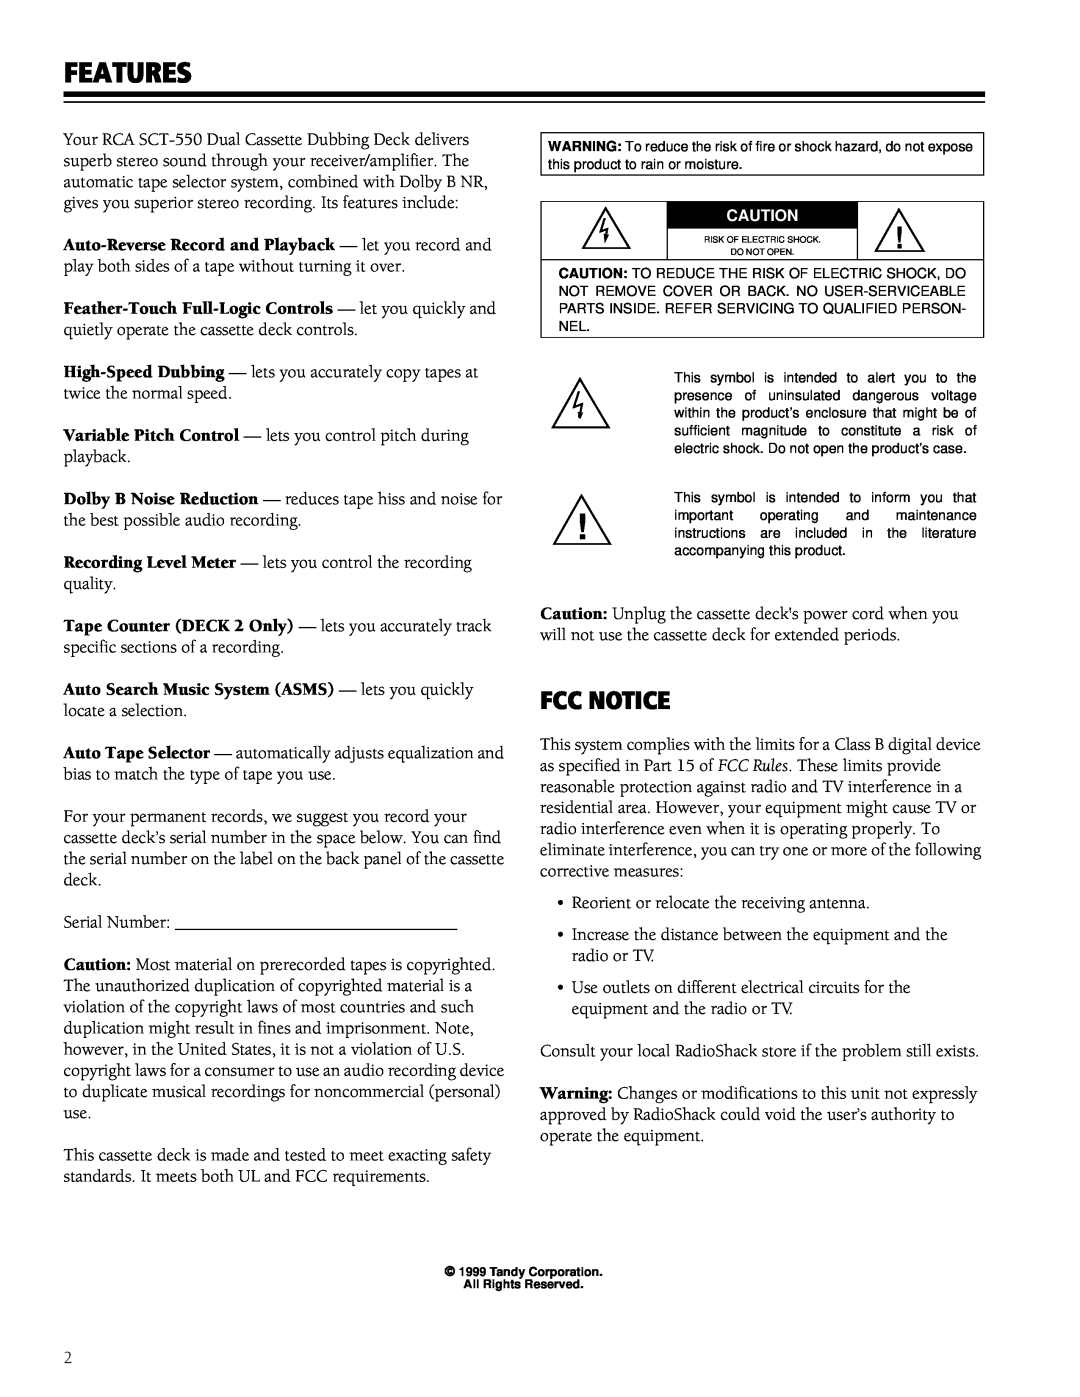 RCA SCT-550 owner manual Features, Fcc Notice 